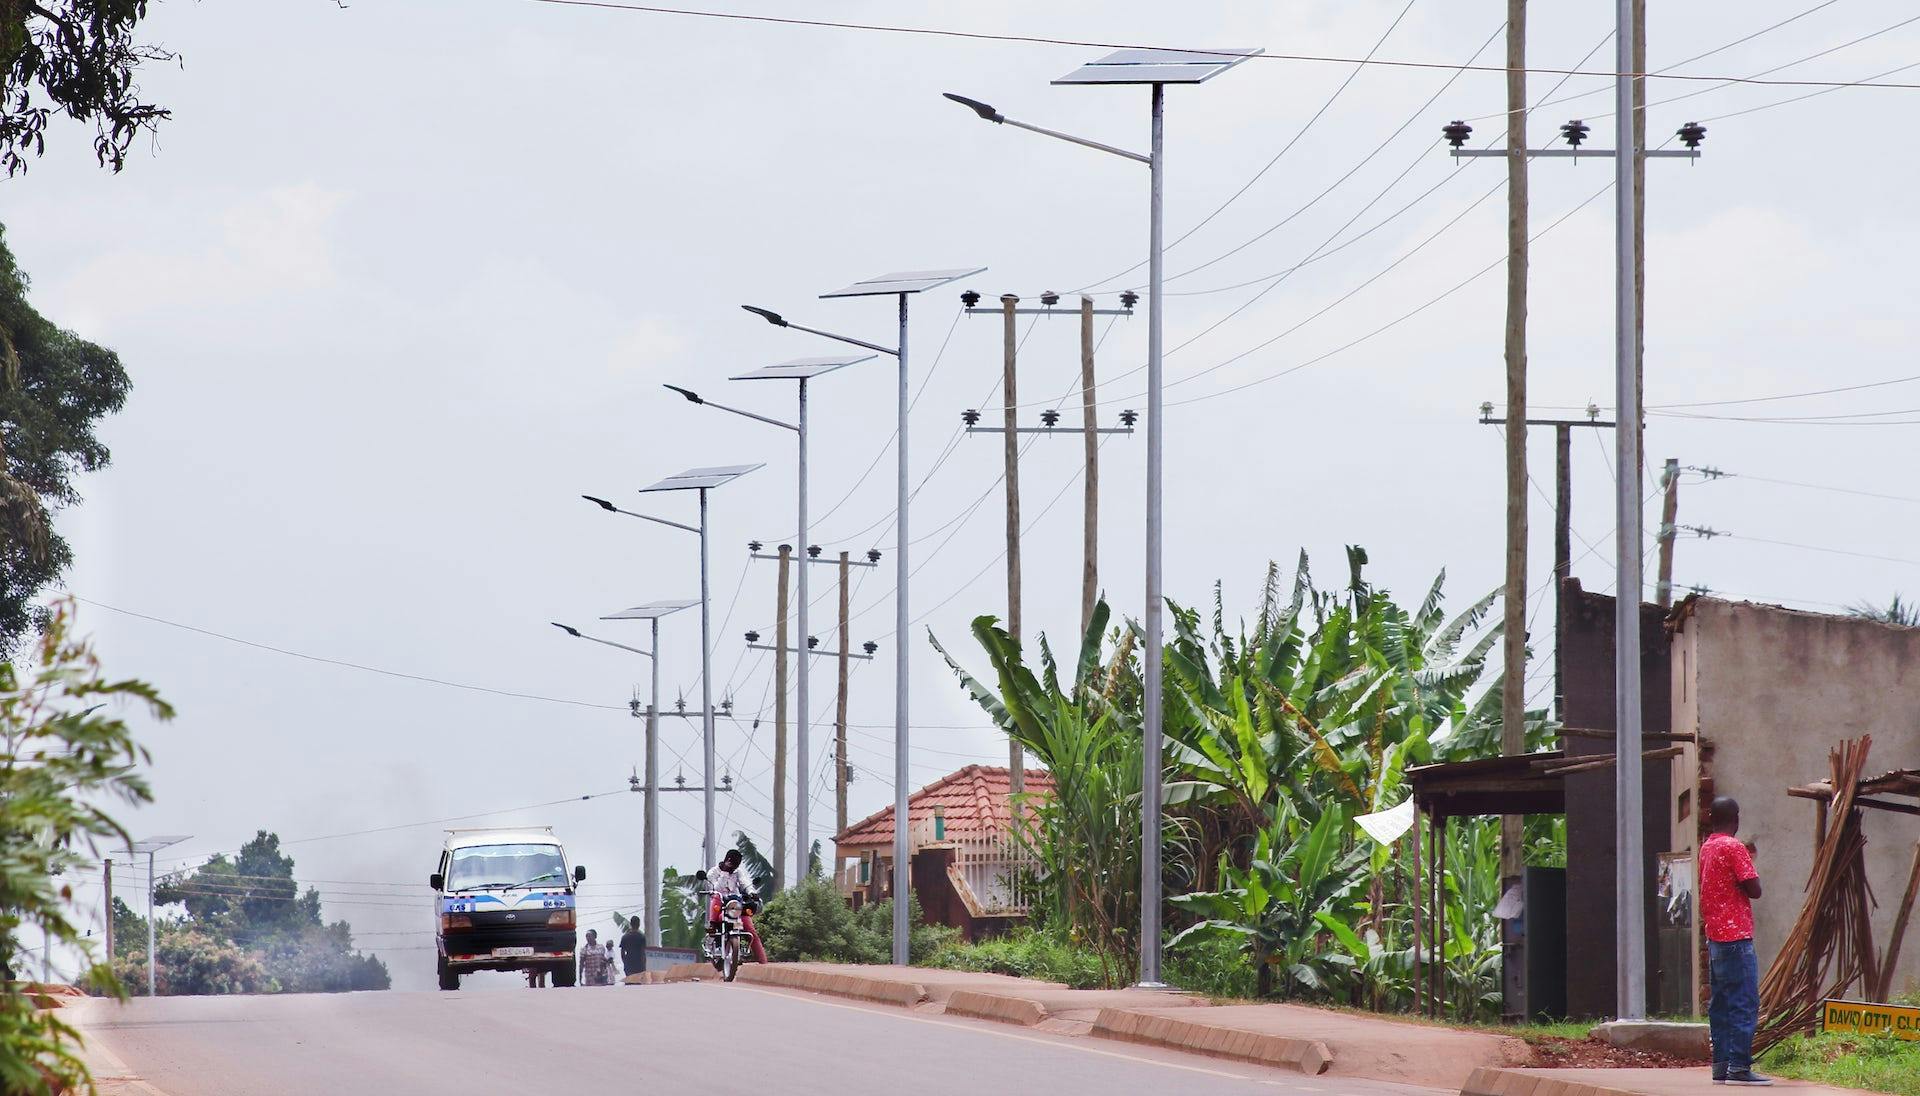 A road where a series of utility poles with solar panels are mounted.